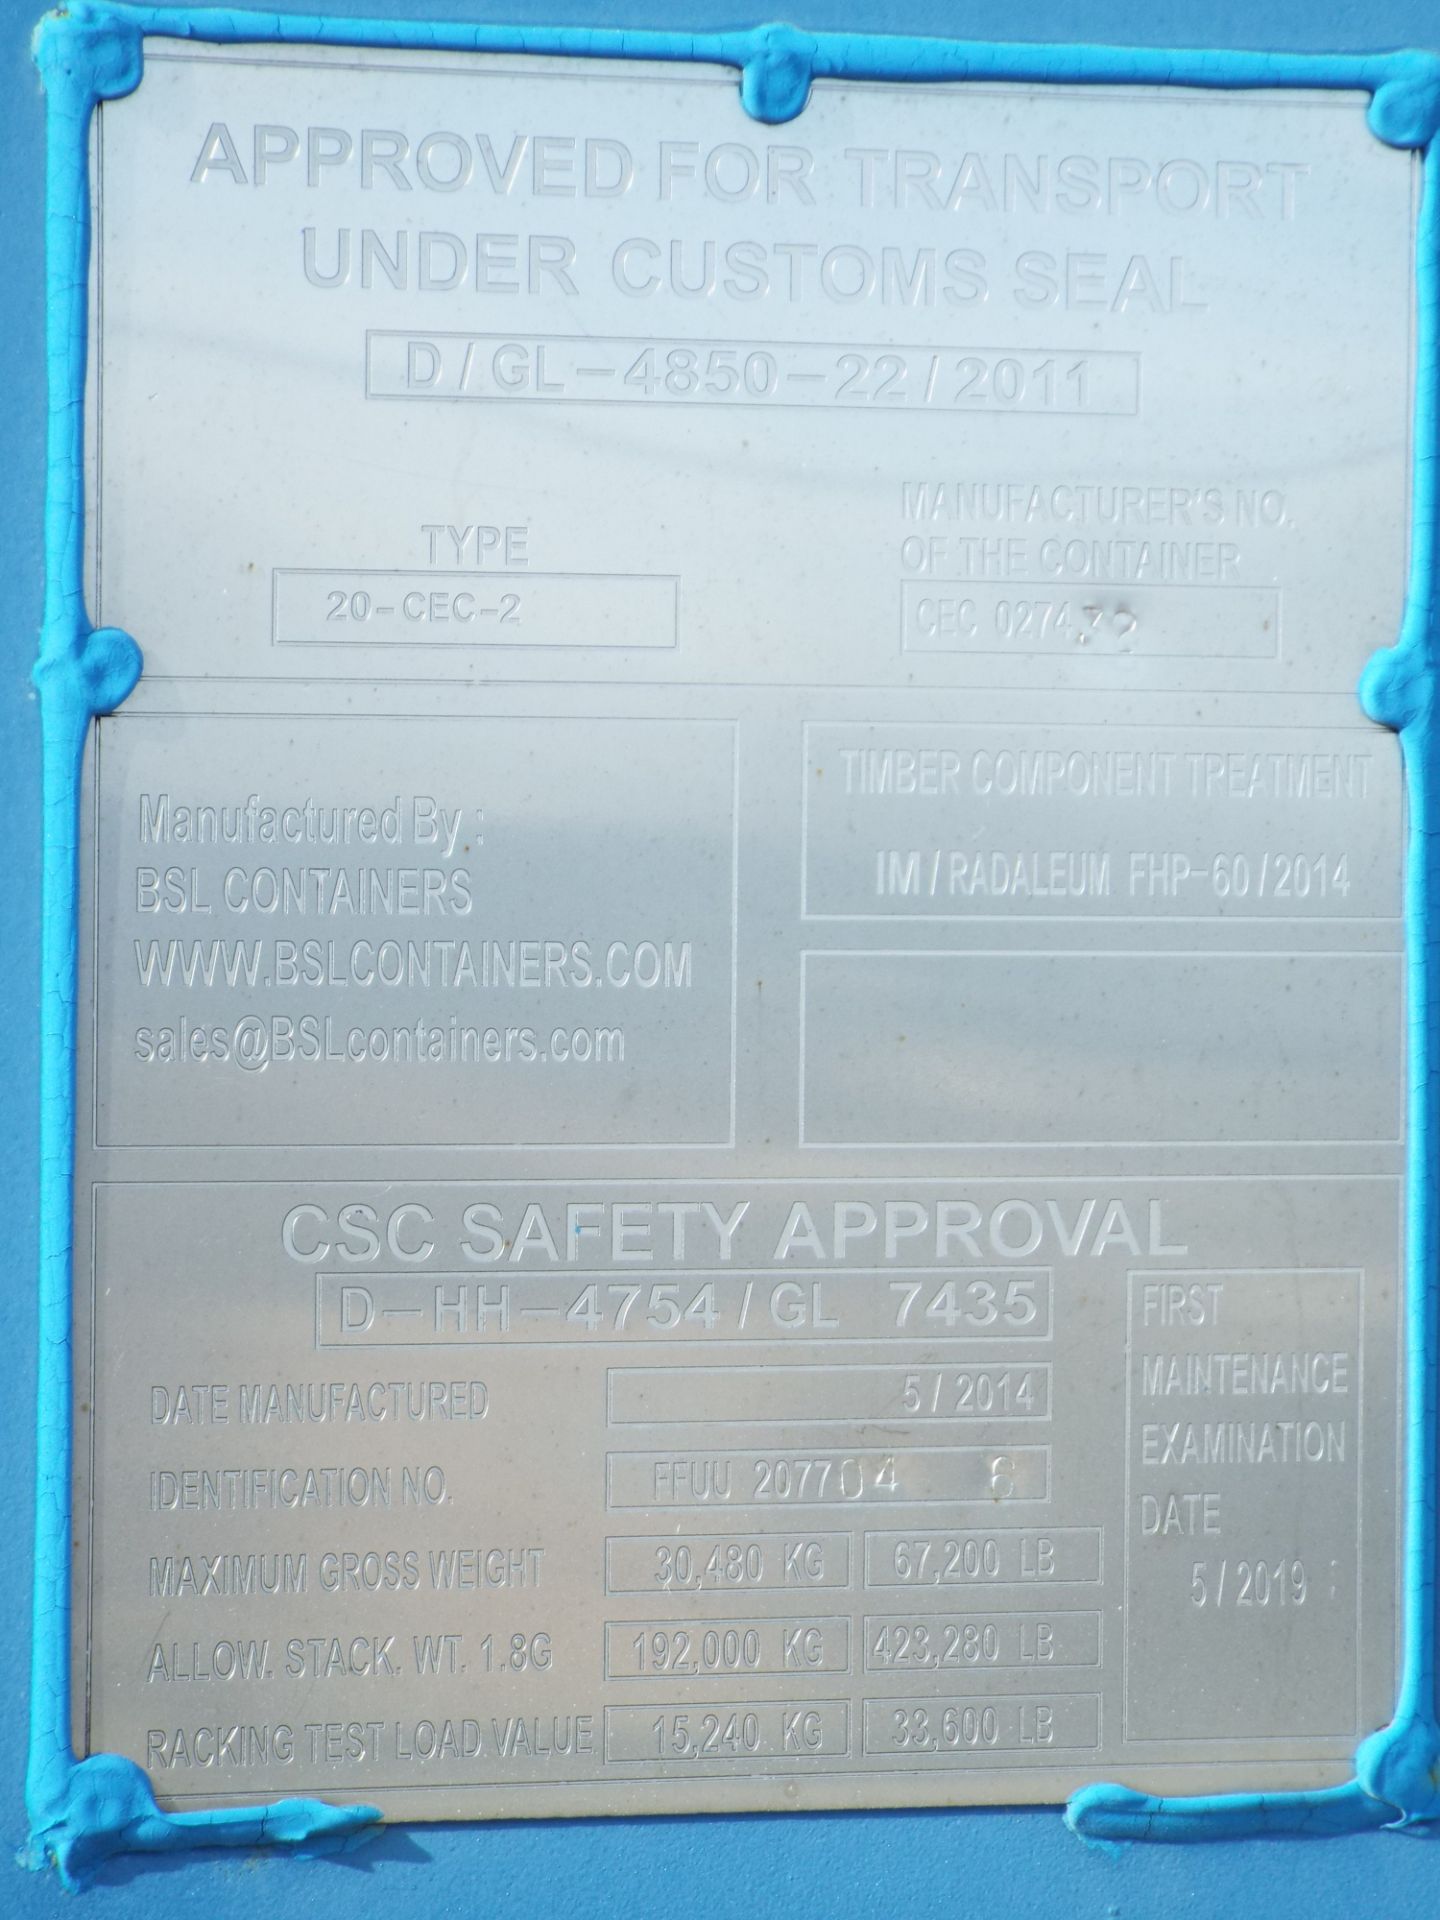 BLS CONTAINERS (2014) 20' SEA CONTAINER, S/N: CEC-027432 (CI) (DELAYED DELIVERY) - Image 3 of 3